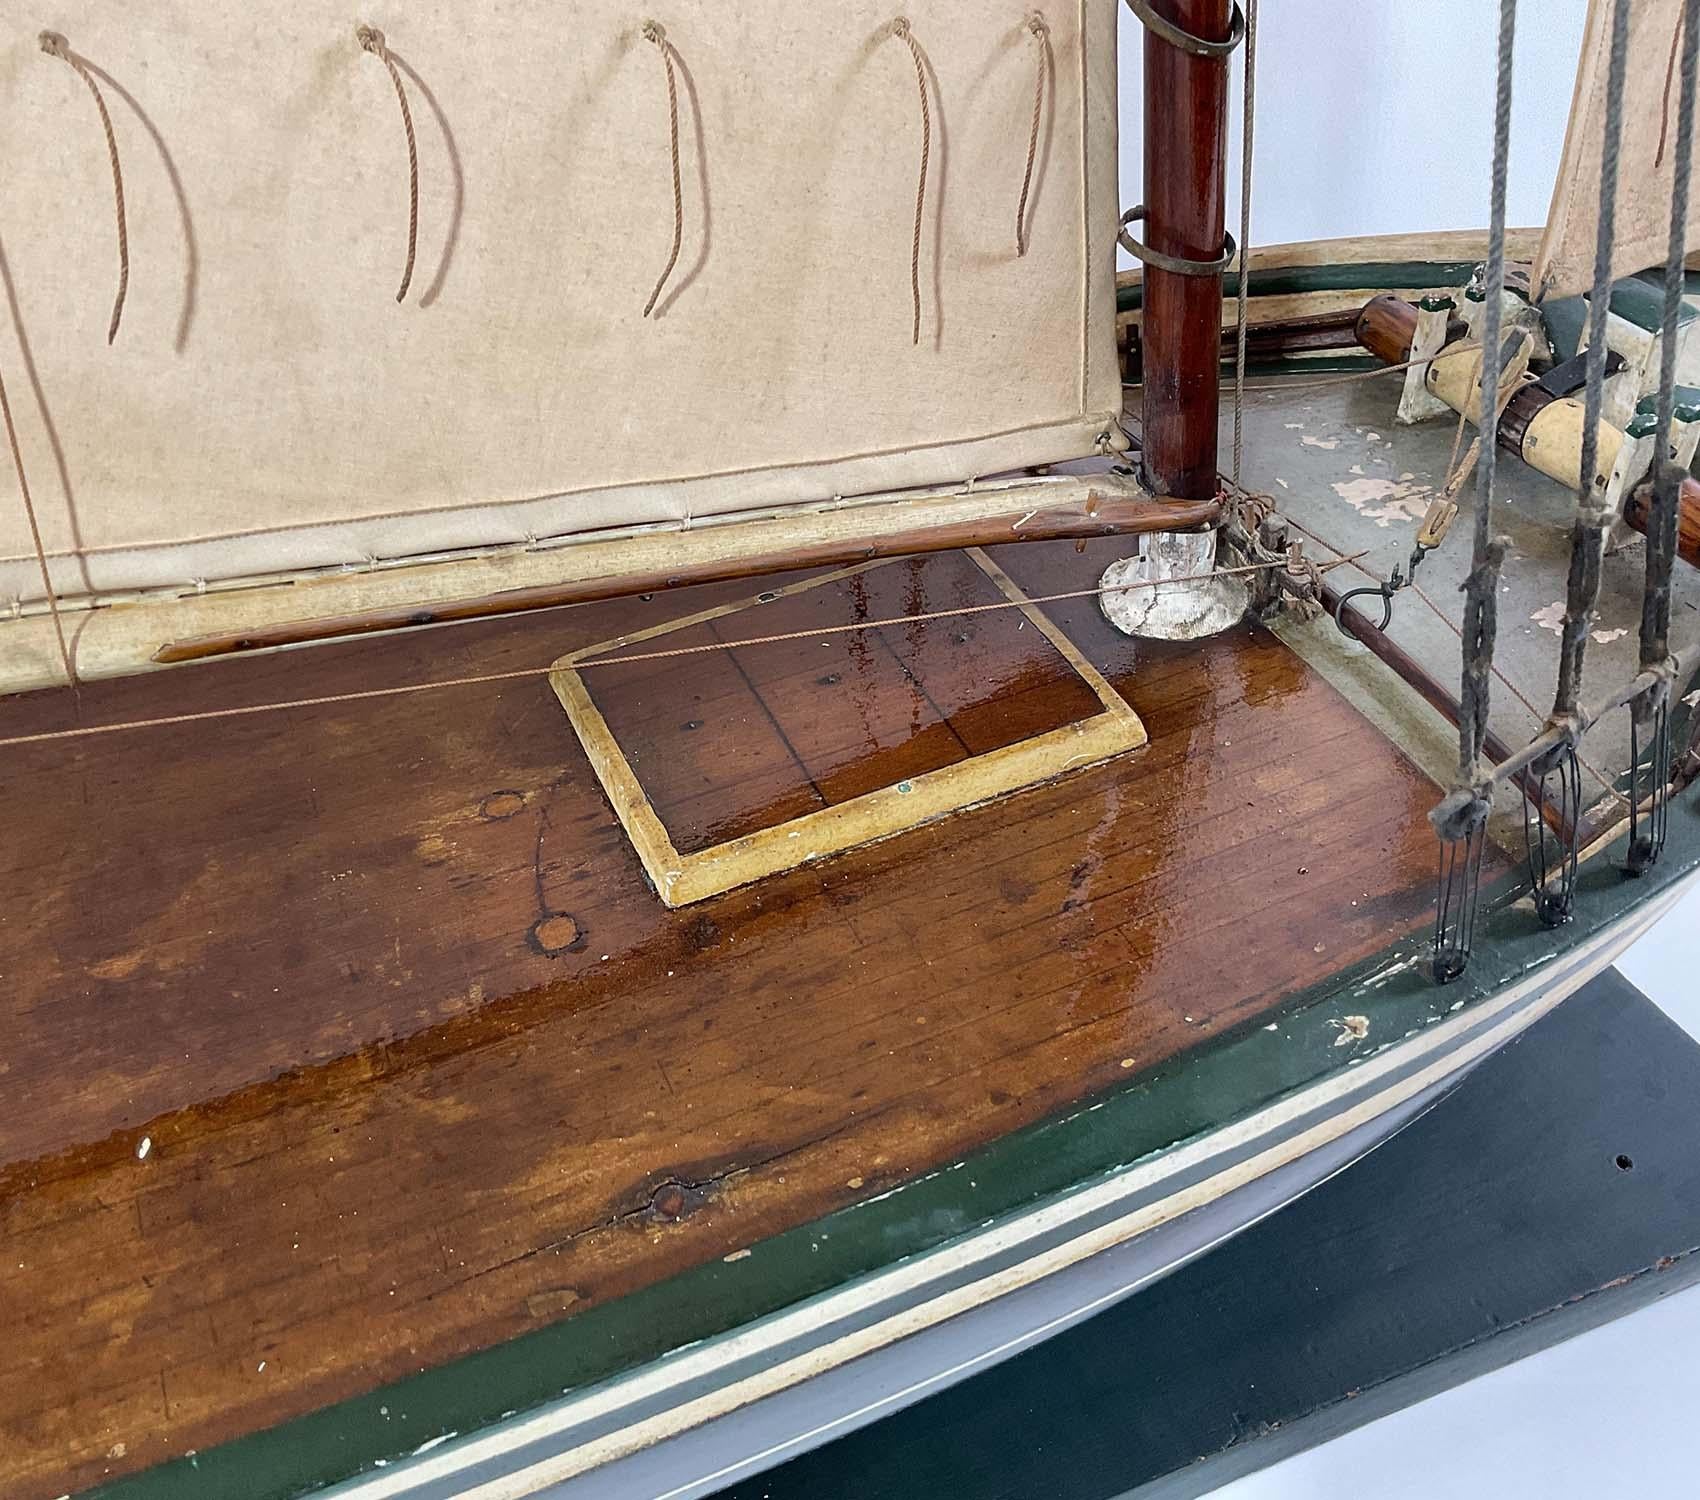 Wood Model of the Oyster Sloop Fanny Fern of Quincy Mass